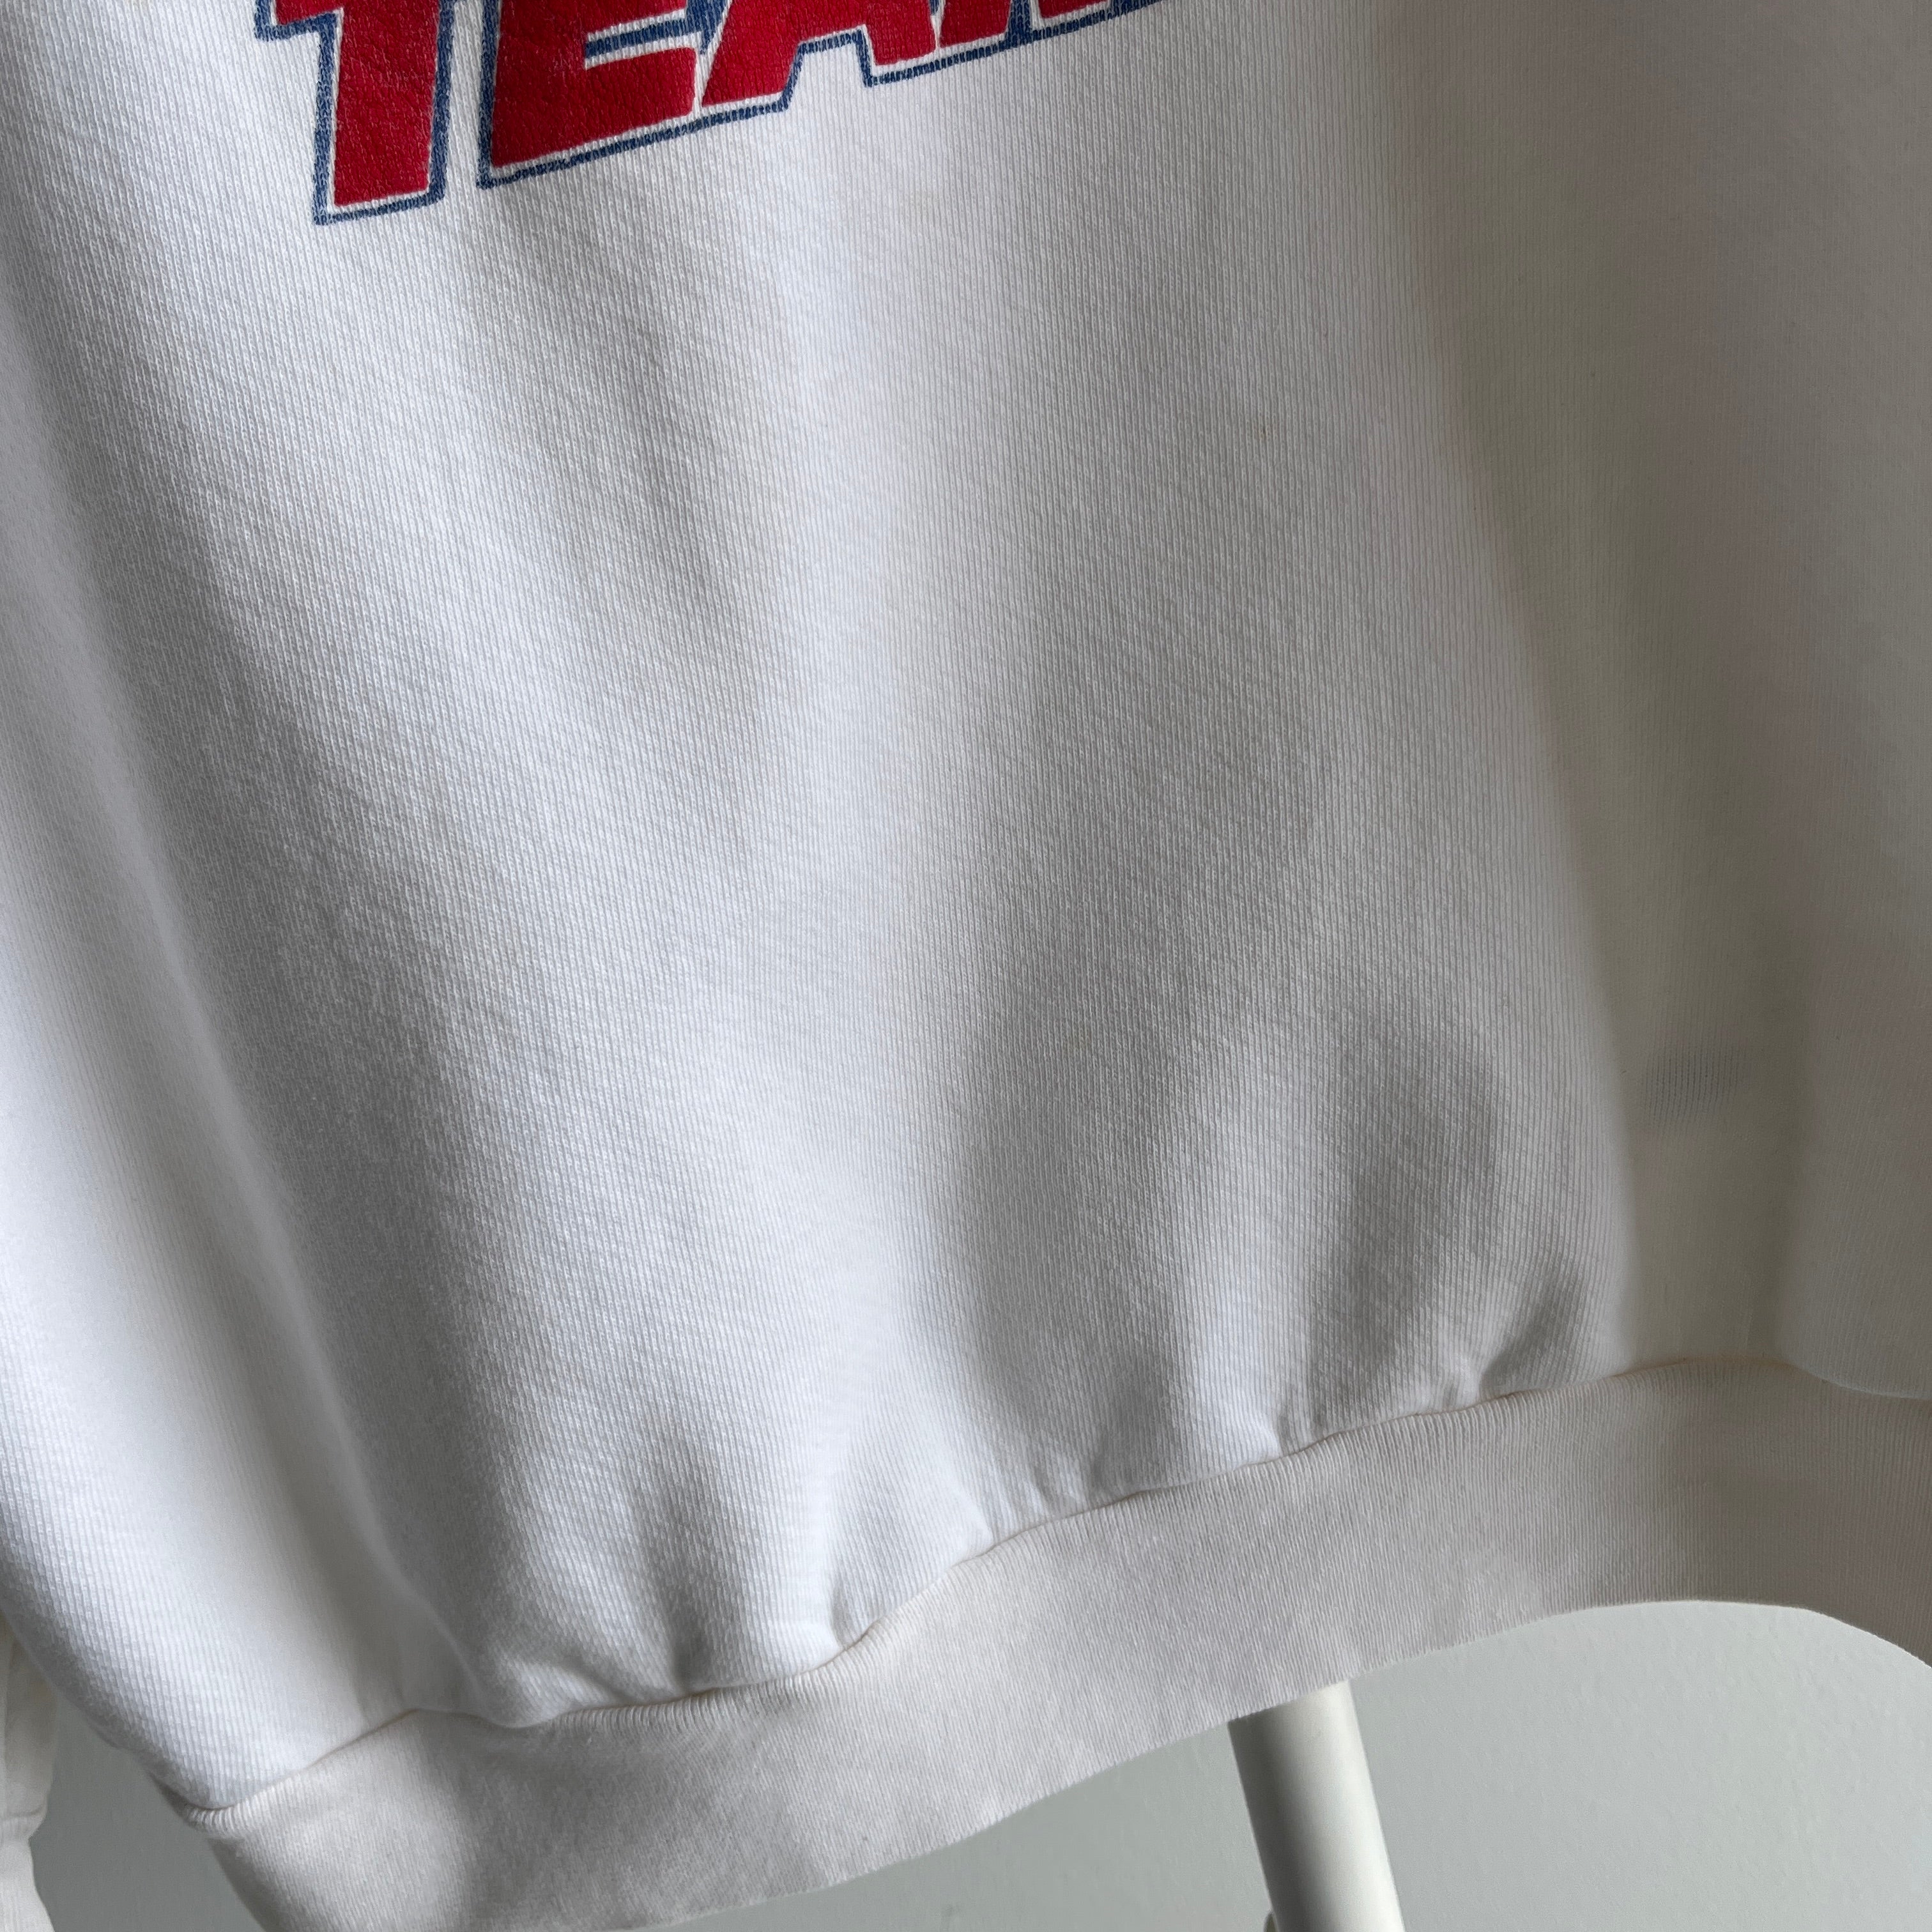 1980s USA Beer Drinking Team Sweatshirt - It Has A Great Fit